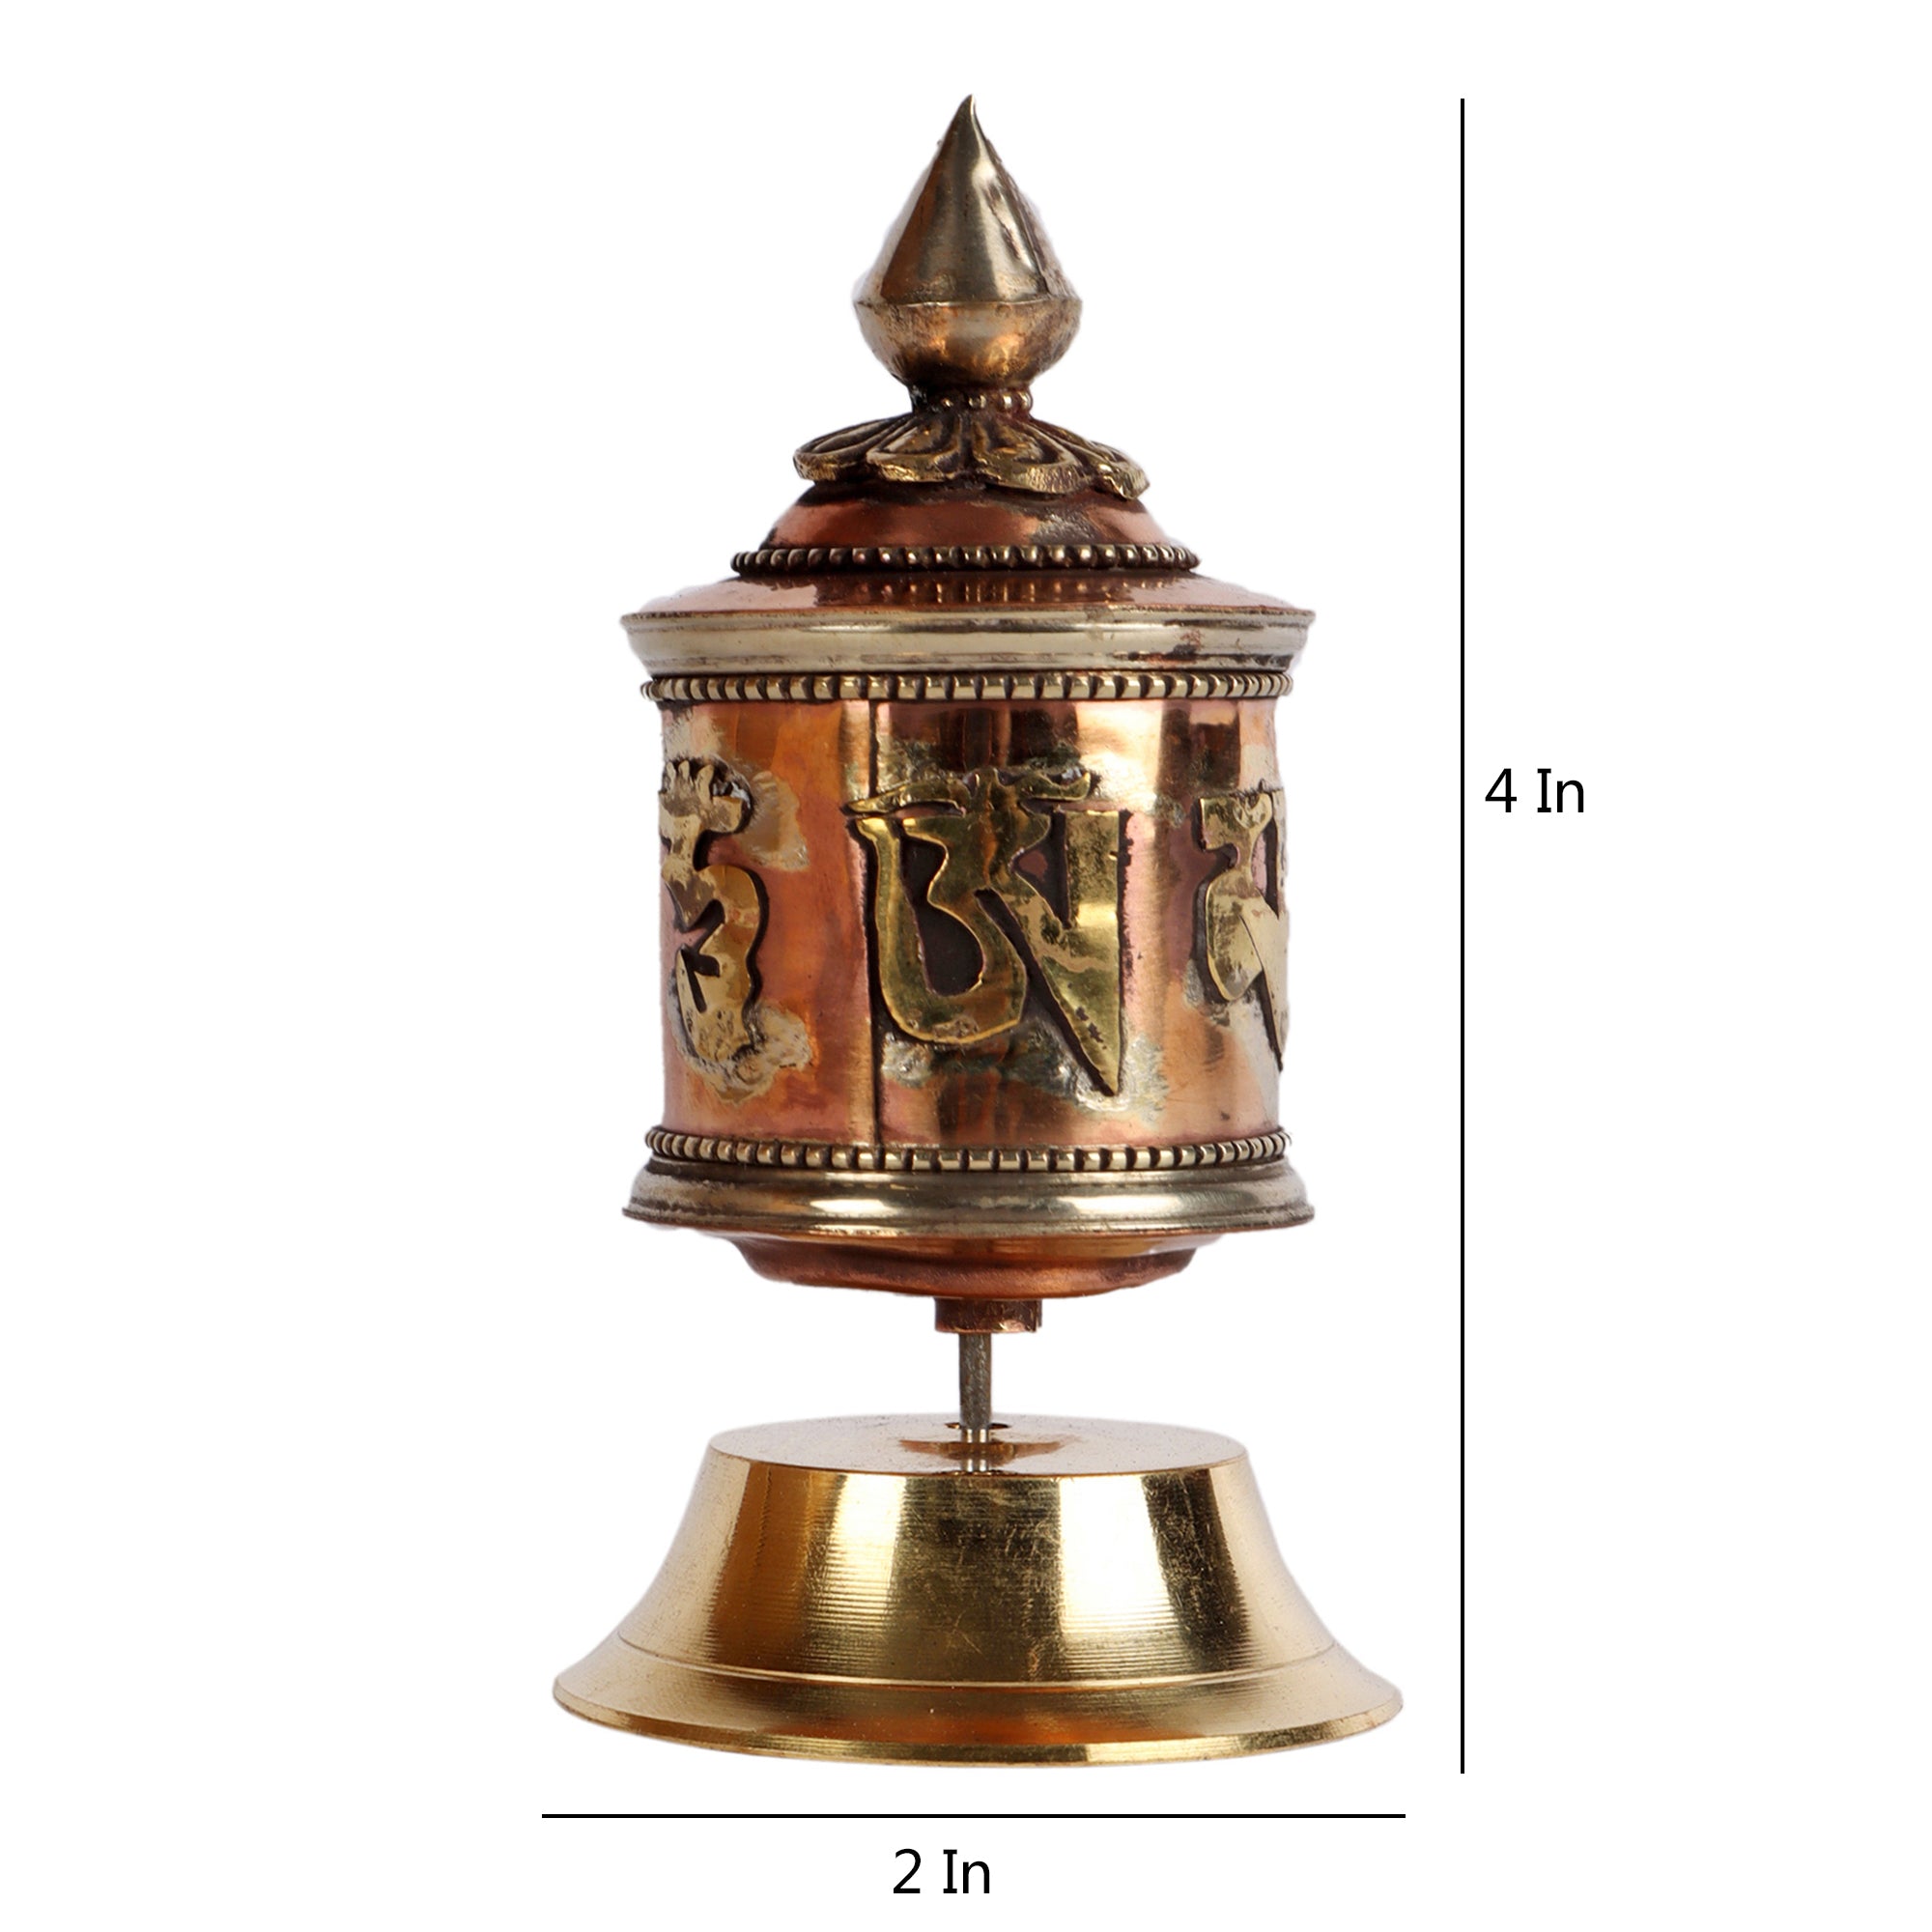 Buddhist Prayer Wheel - Table Top (One-Row Lineage Text)